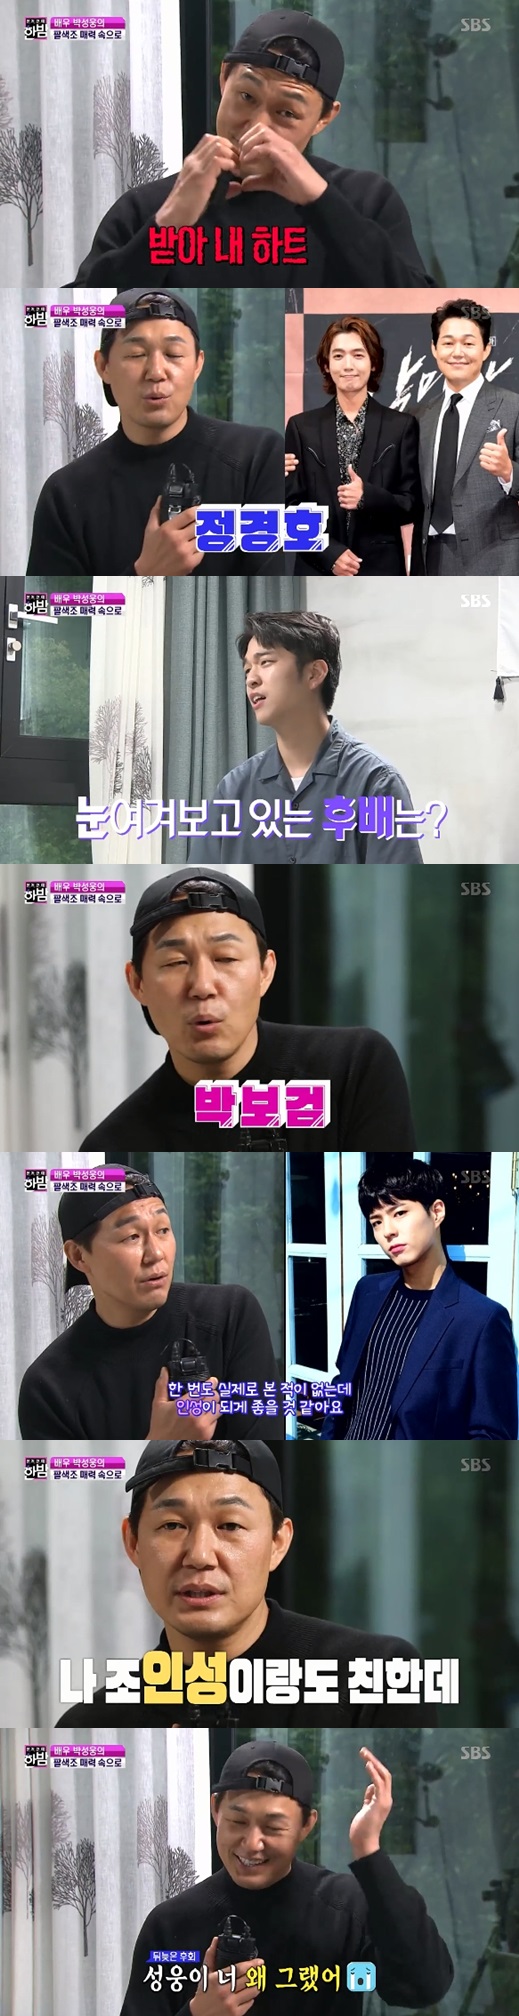 Actor Park Sung-woong has expressed his curiosity about Park Bo-gum.On SBSs Midnight, which aired on the night of the 27th, an interview with Actor Park Sung-woong, who turned into CF director, was released.Park Sung-woong, who got the Bromance End King modifier by co-working with numerous male actors, cited Jung Kyung-ho as the best partner on the day.The two men co-worked the drama Life on Mars and When the Devil Calls Your Name. (with Jung Kyung-ho) Actington is too good for something else, Park Sung-woong said, expressing his affection.Asked if there is a recent eye-catching actor, he said, Park Bo-gum. I have never actually seen it before, but it seems to be good personality.I am close to Jo In-sung, he joked.